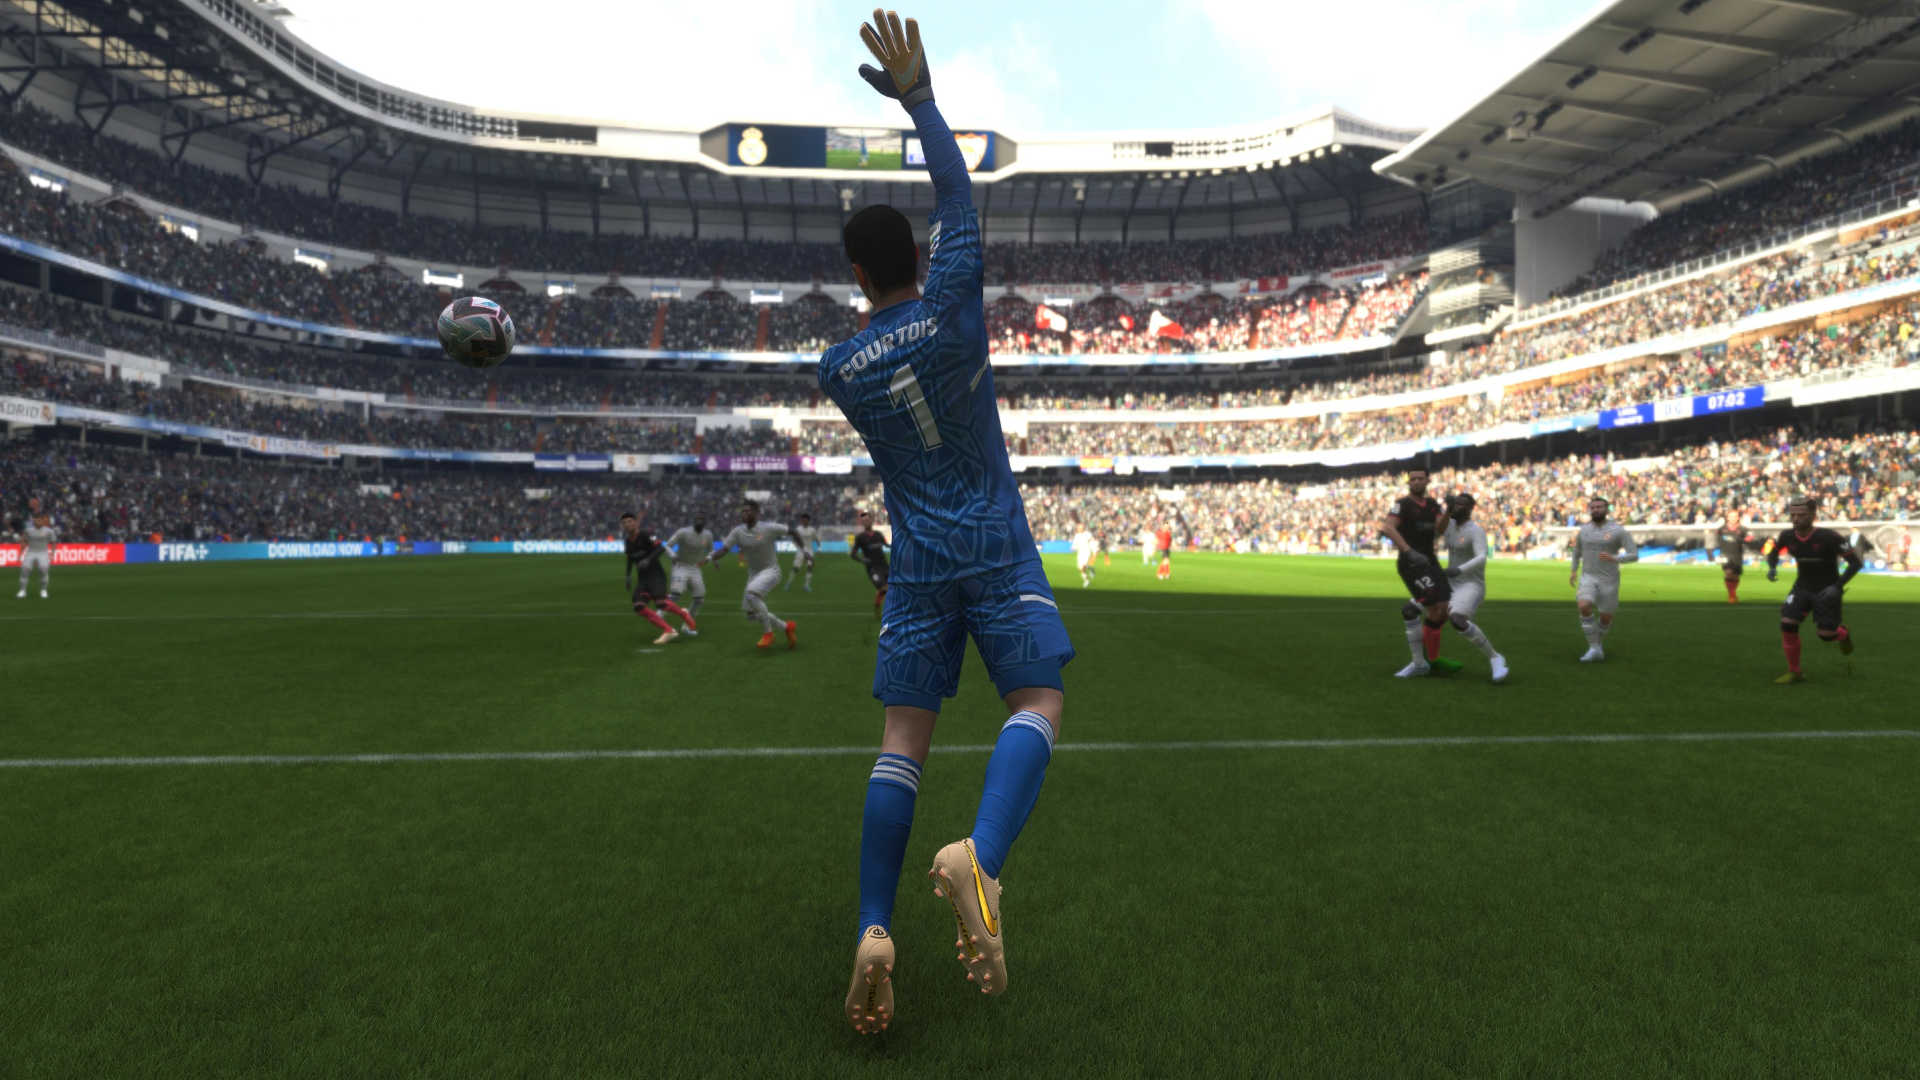 FIFA 23: It’s normal that you can’t play FUT now due to scheduled maintenance